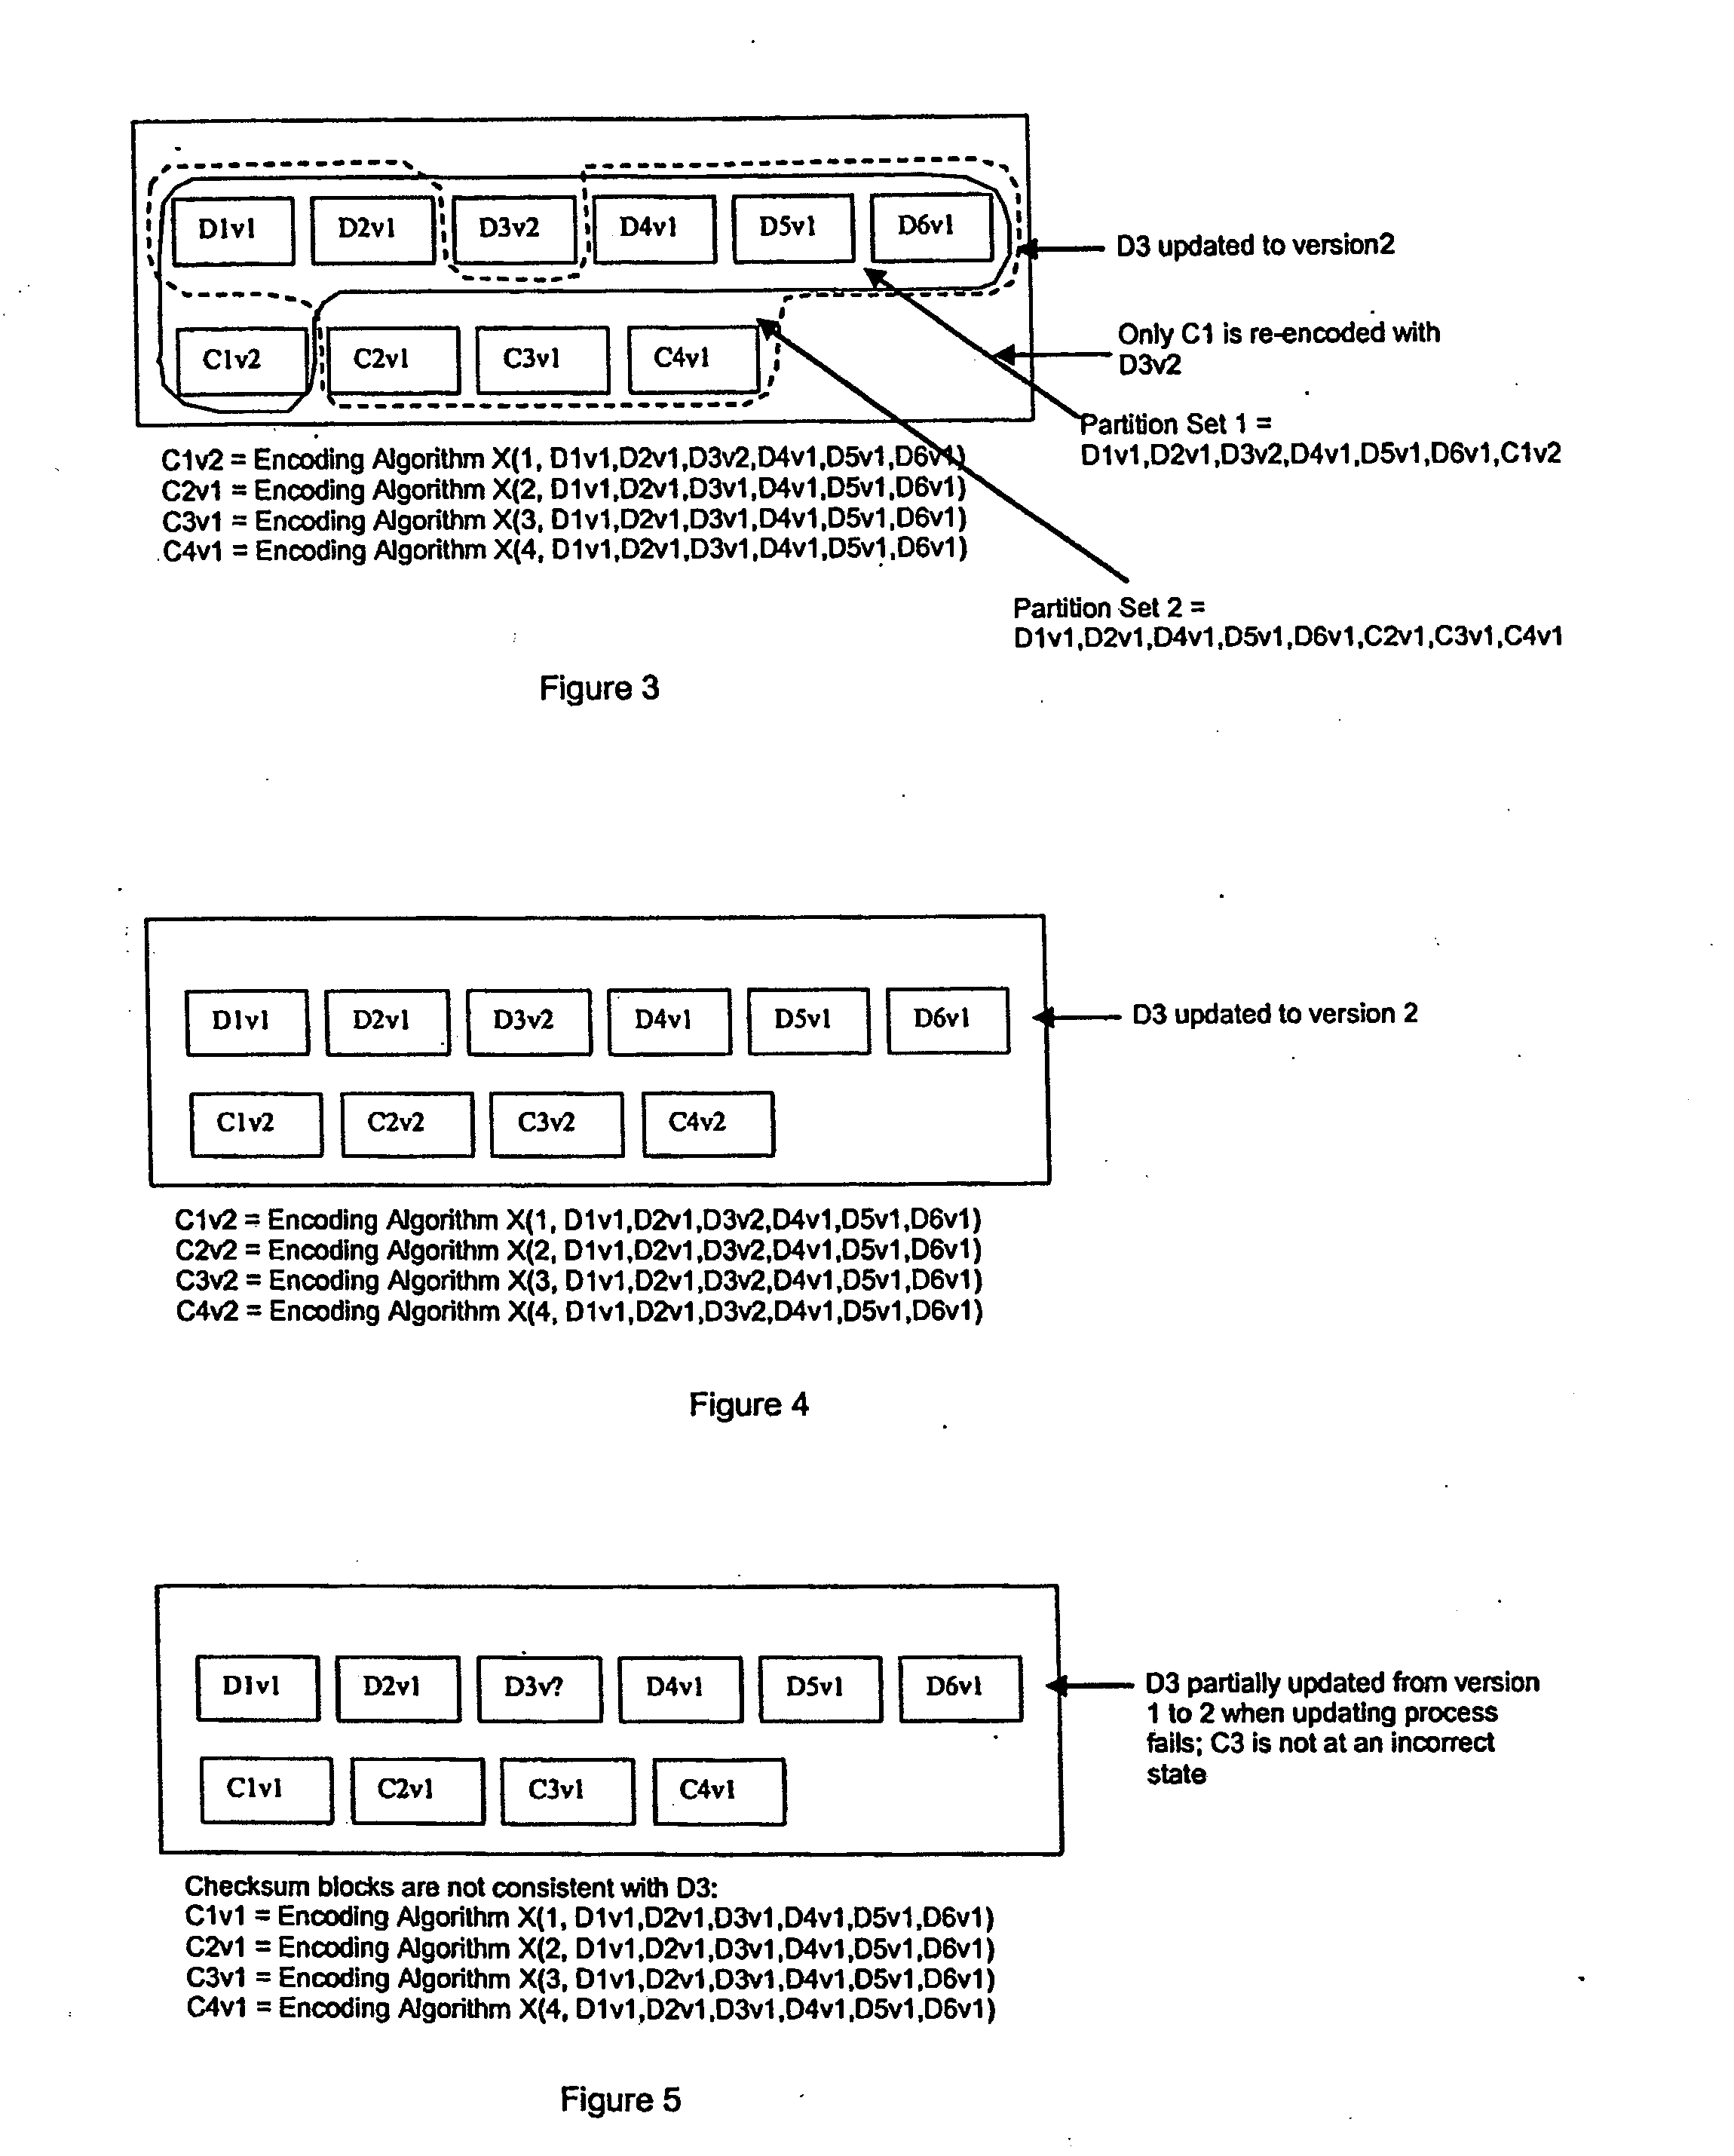 Method for lock-free clustered erasure coding and recovery of data across a plurality of data stores in a network